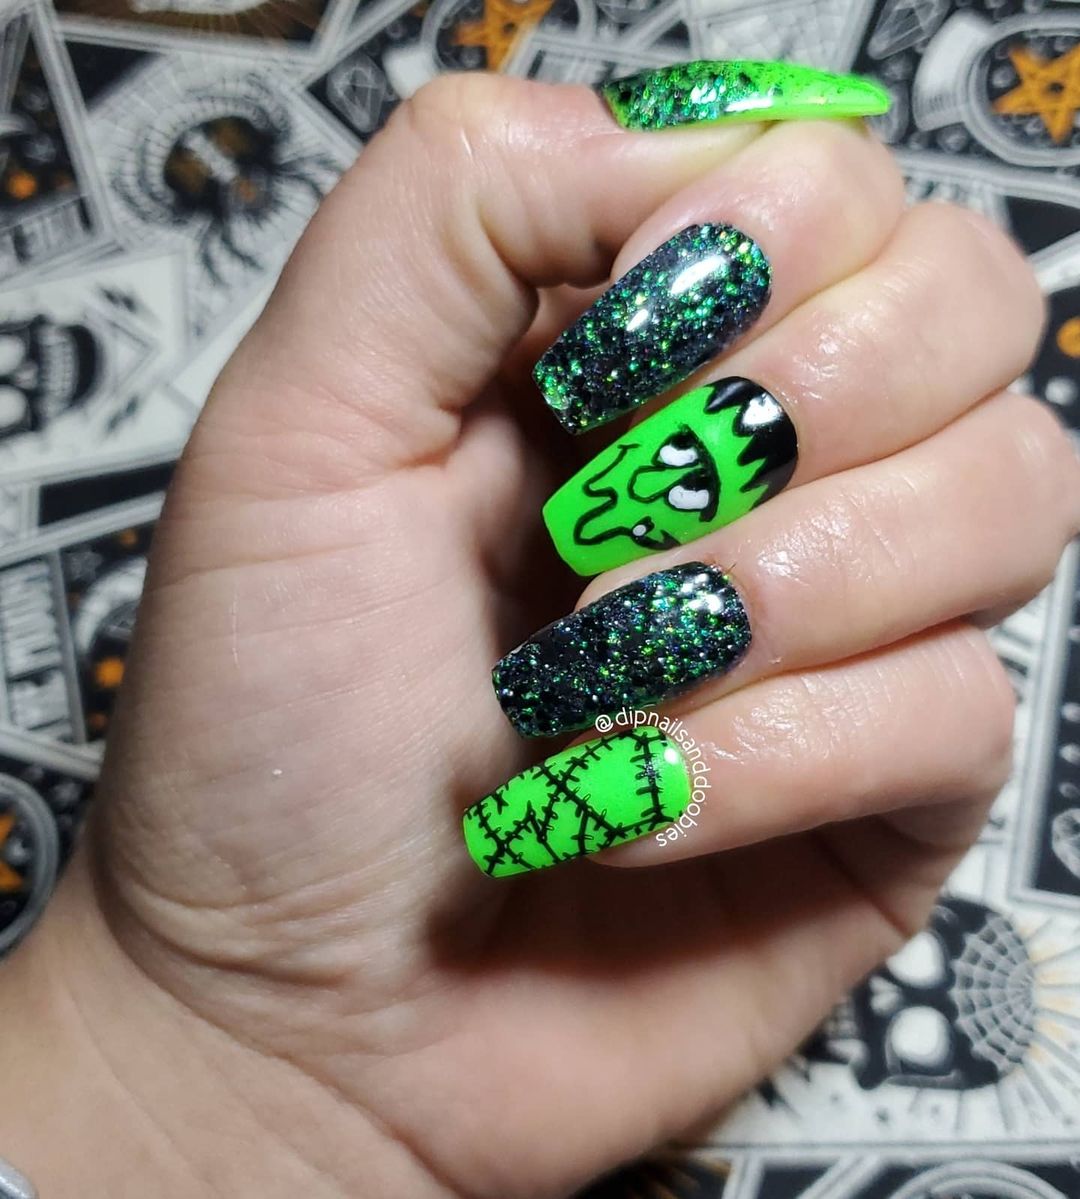 100 Easy Halloween Nails Art Ideas for Your Inspirations - PinMomStuff